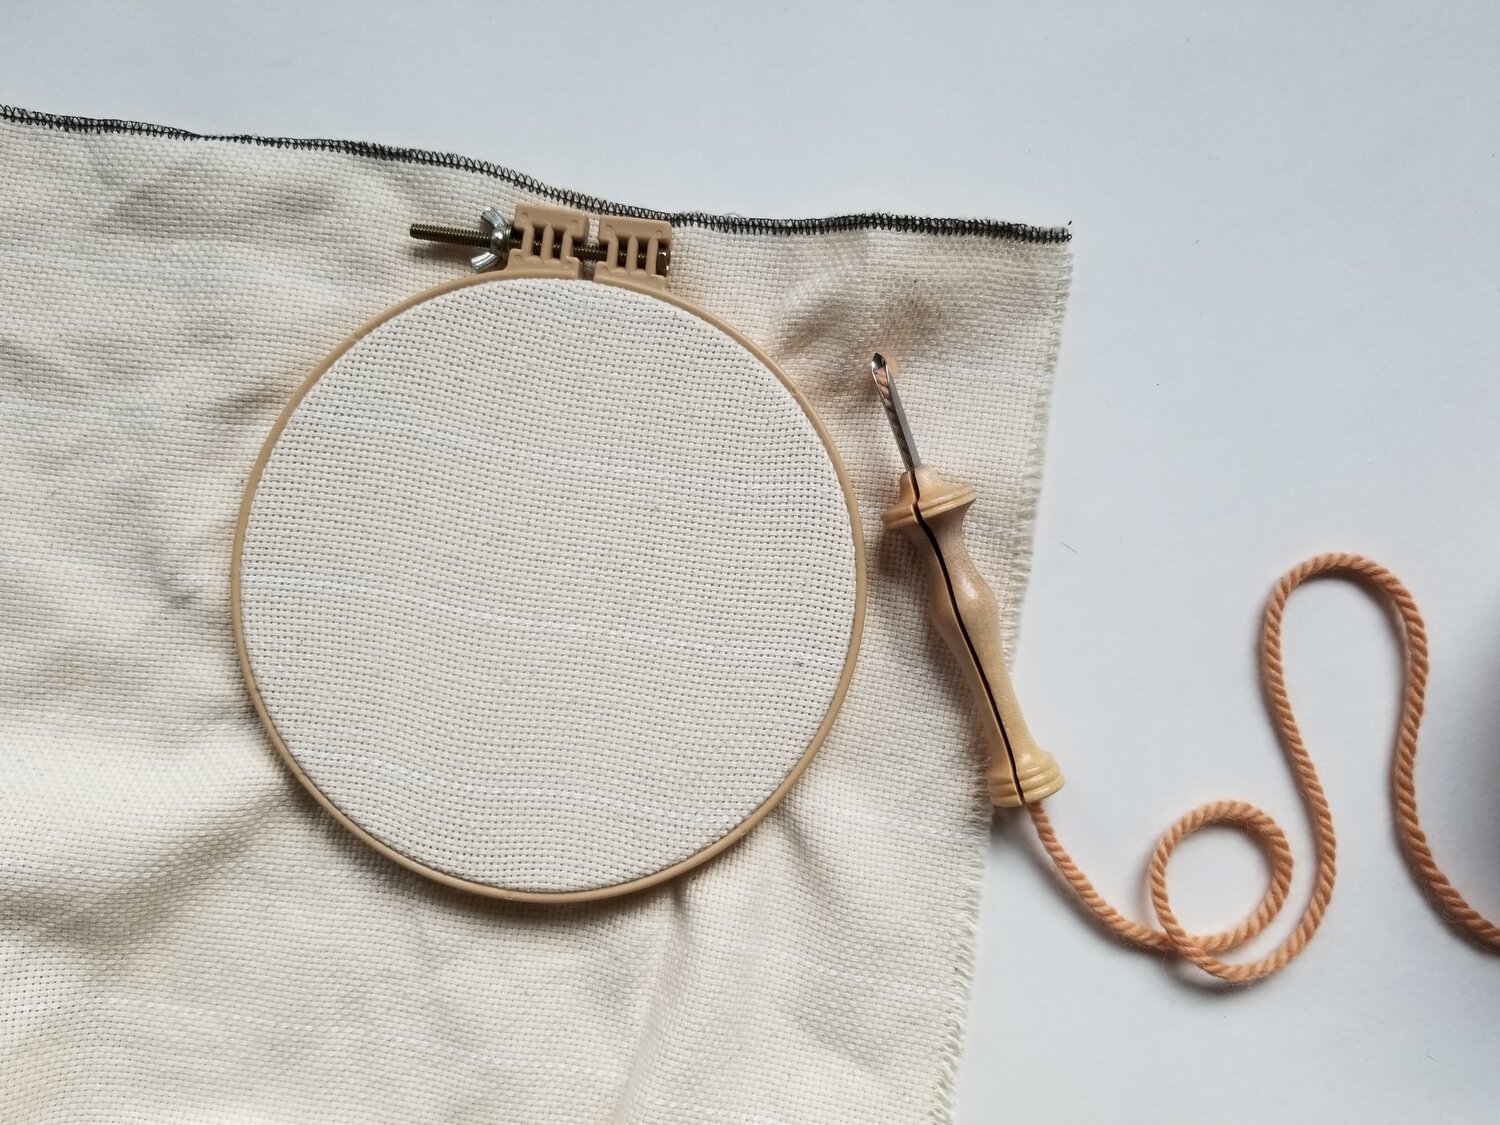 No slip embroidery hoop, prepped with monkscloth.